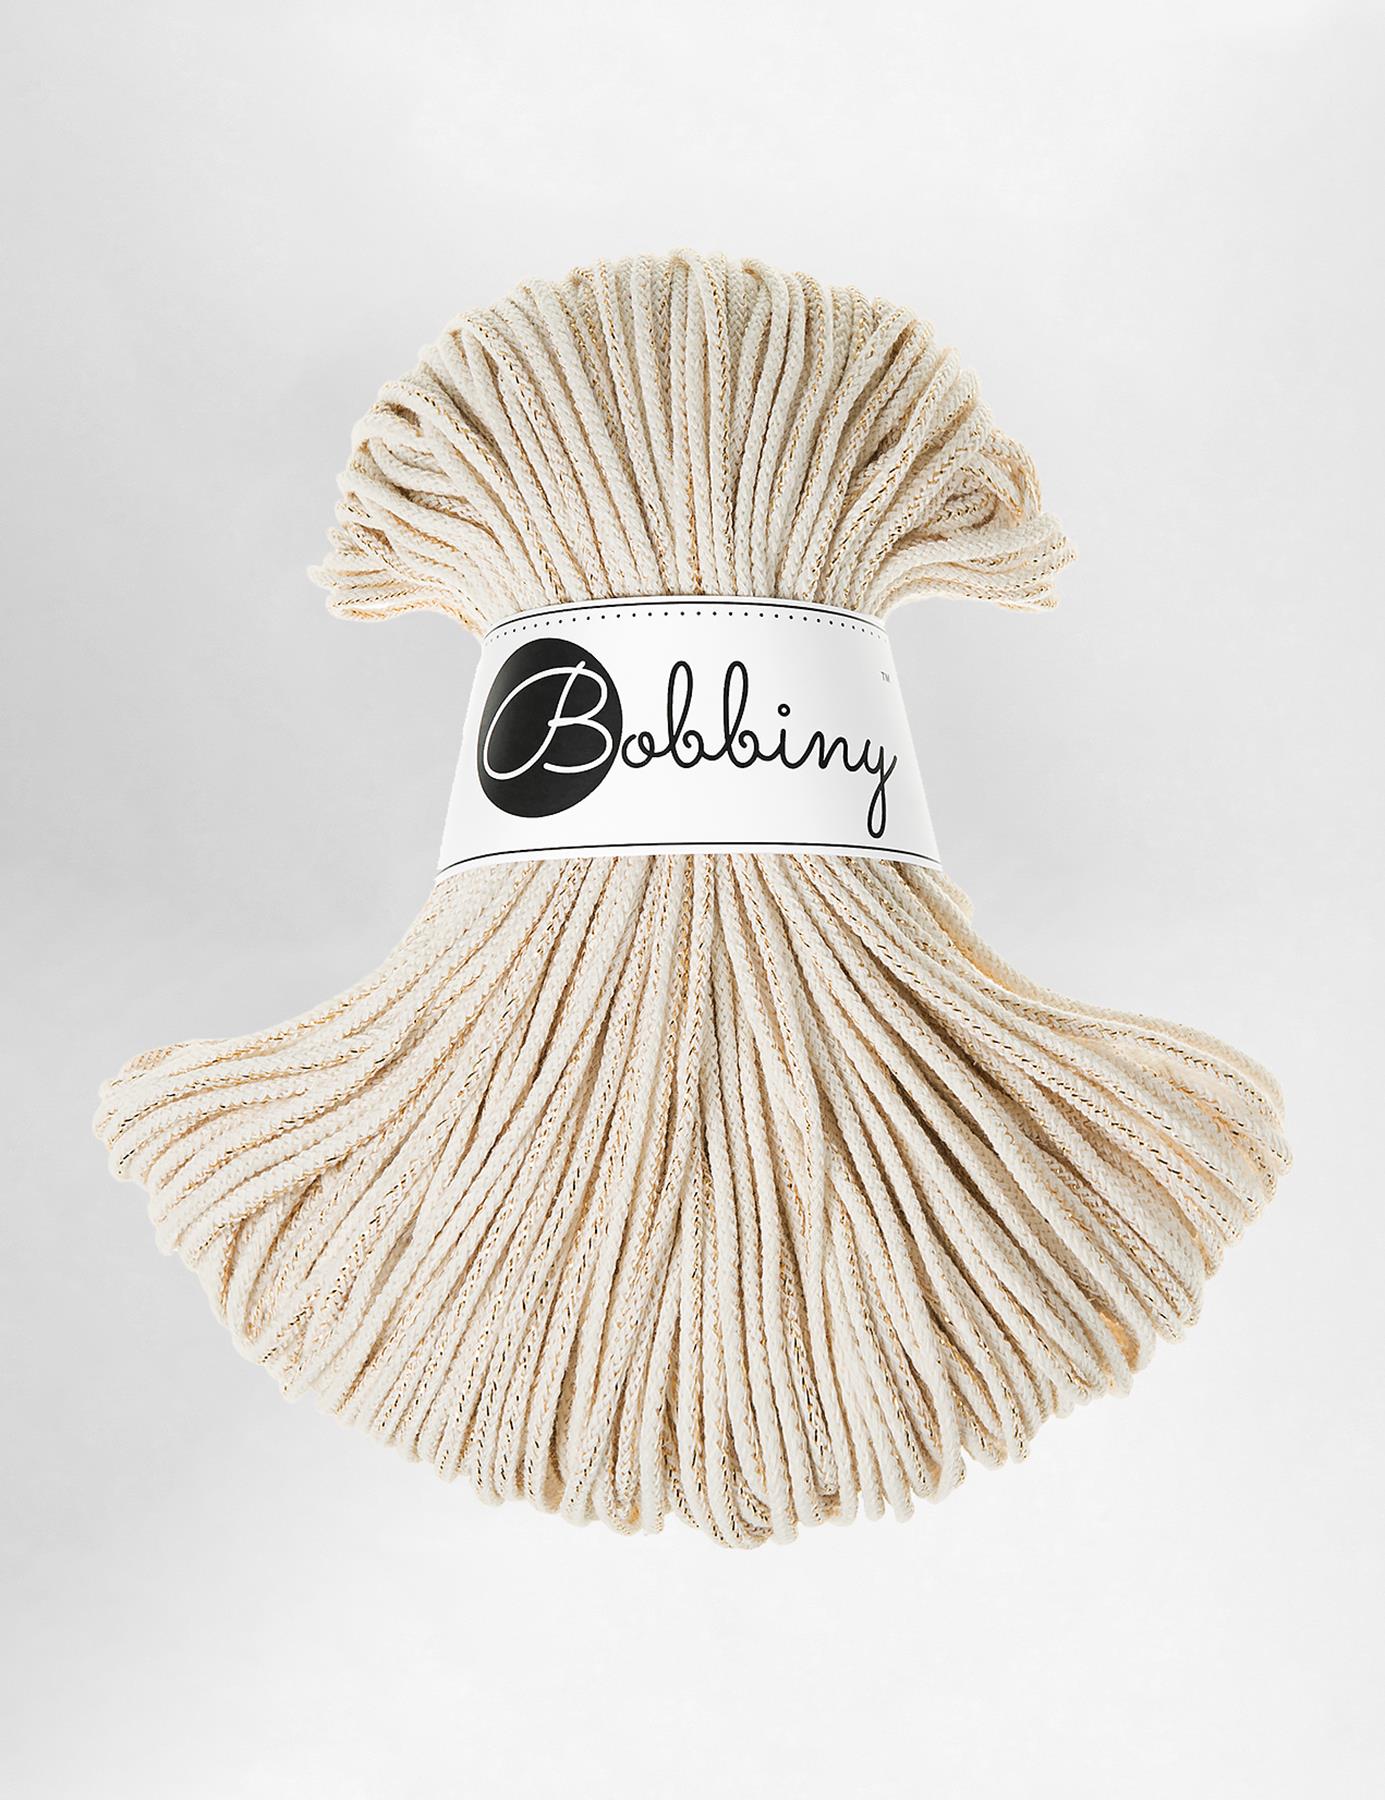 3mm Golden natural recycled cotton macrame cord by Bobbiny (100m)